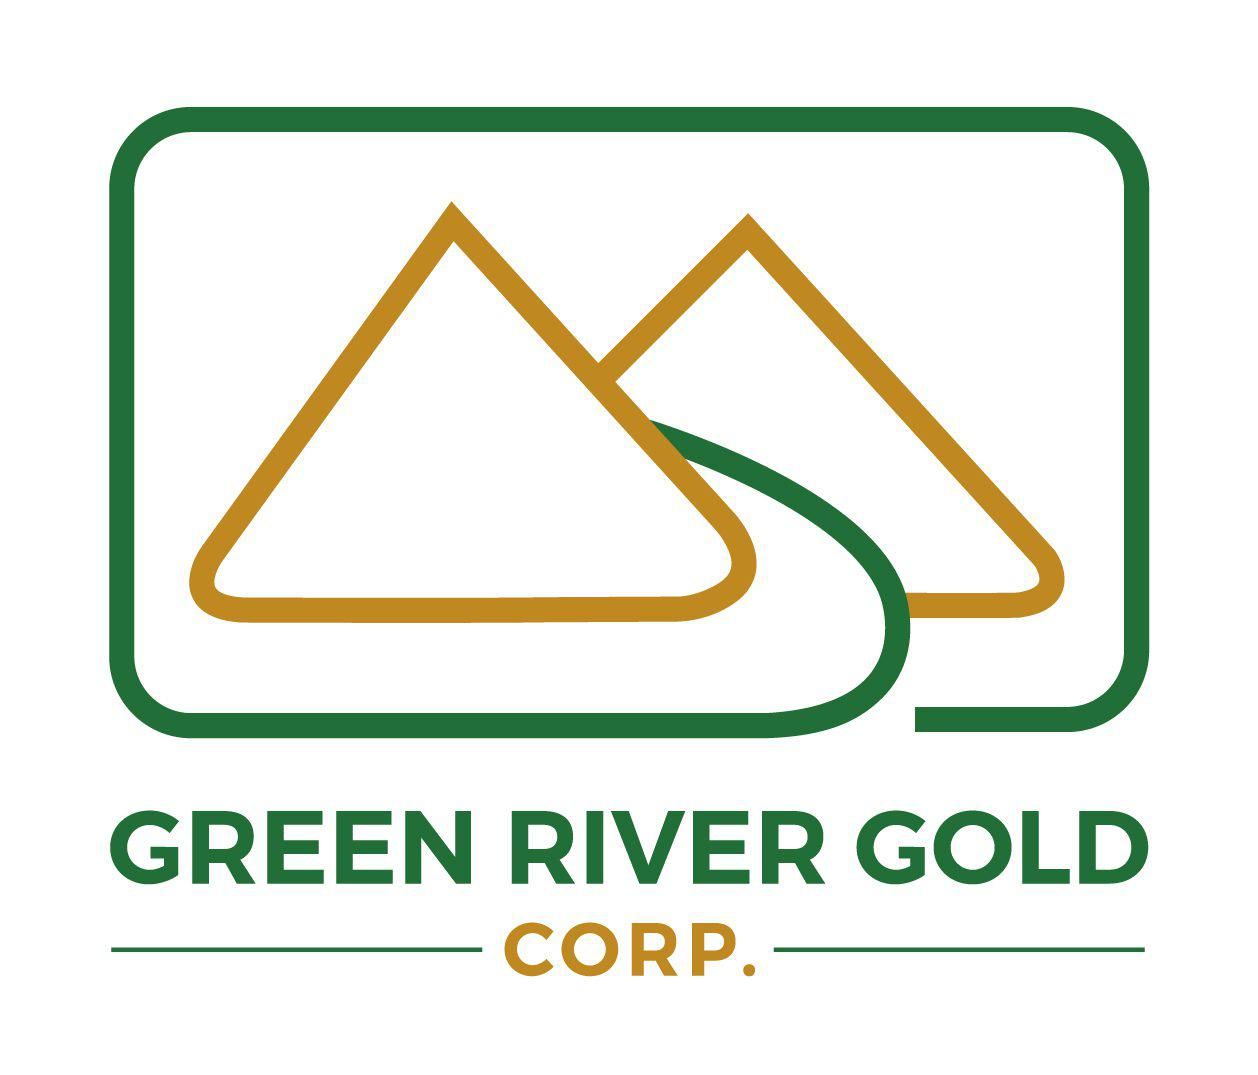 Green River Gold Corp. Announces Non-Brokered Private Placement Offering of Units